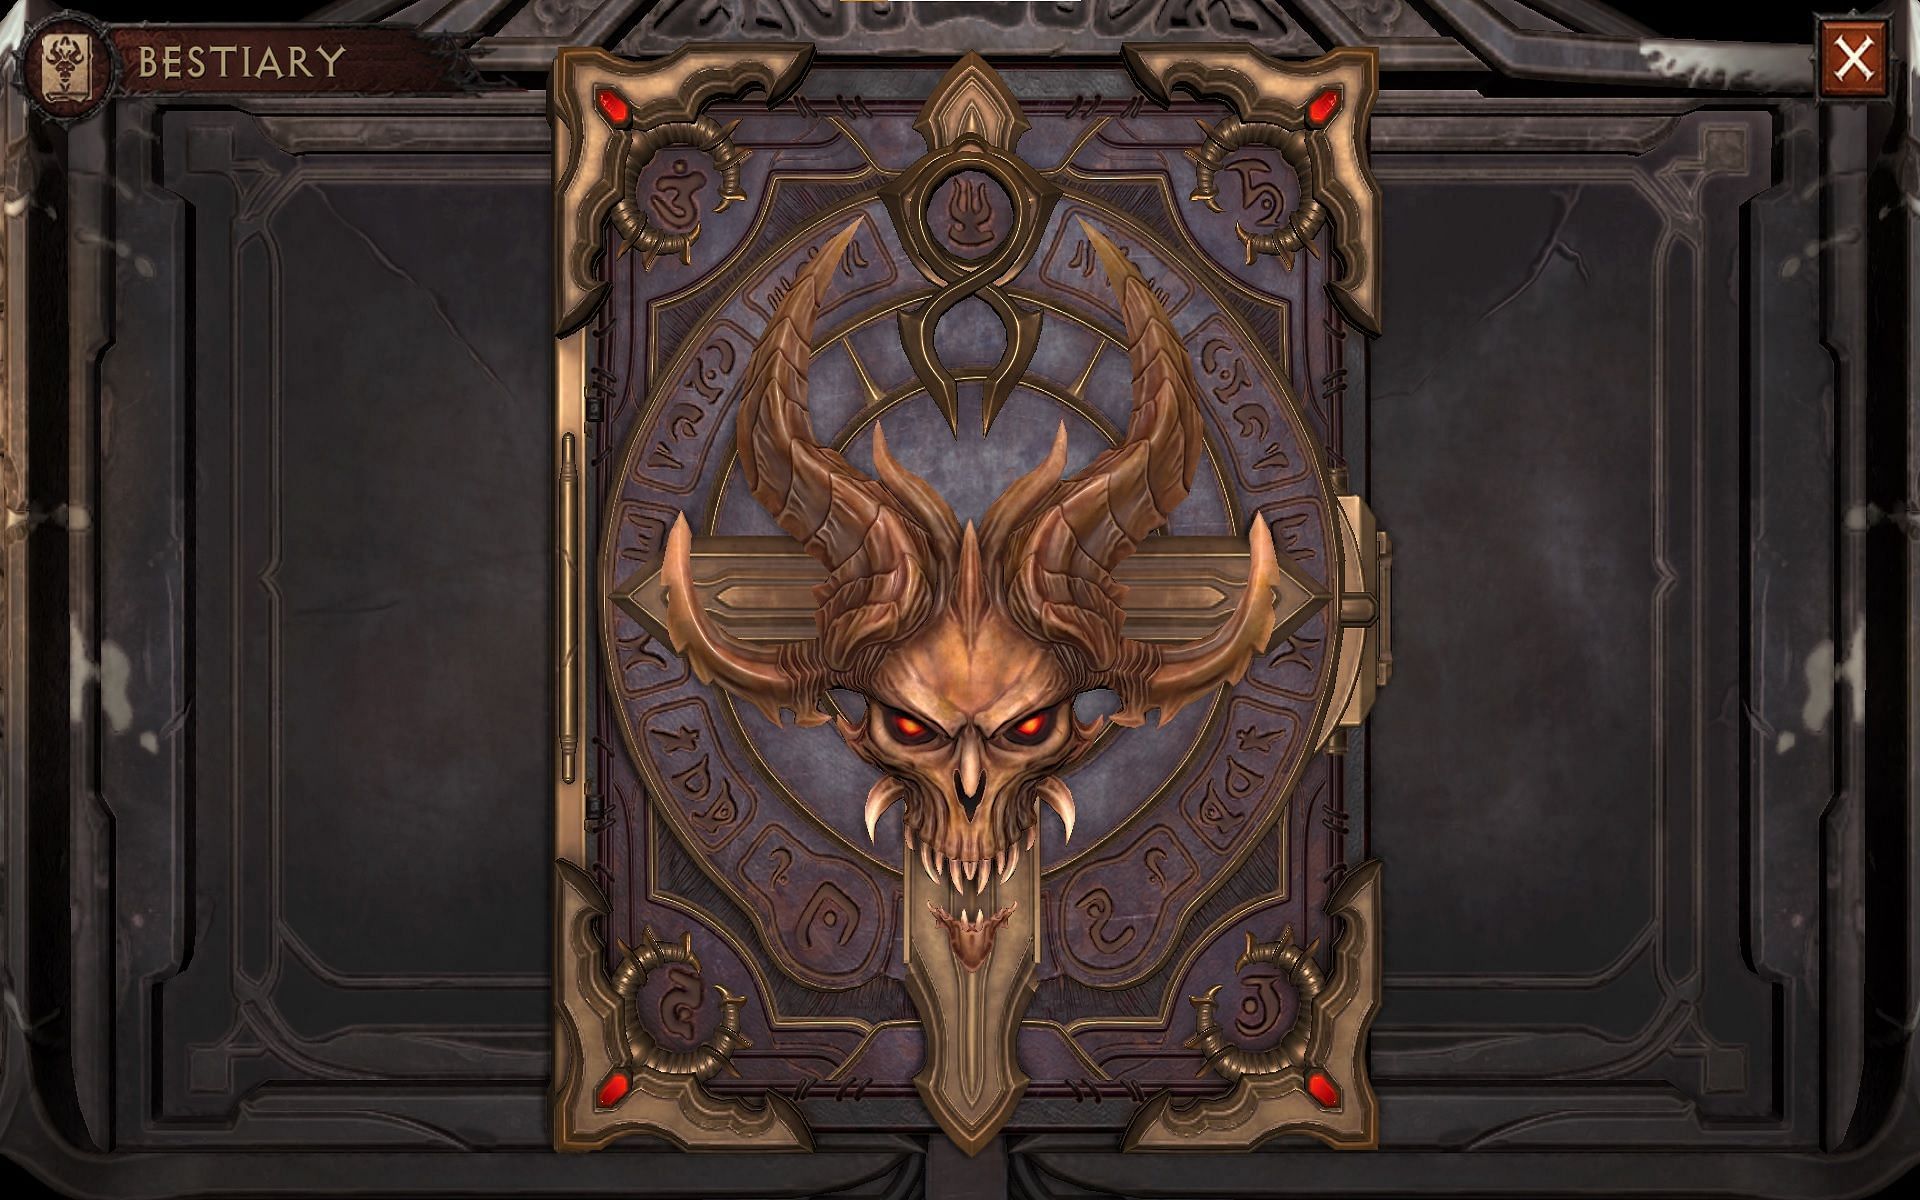 The cover of the Horadric Bestiary (Image via Activision Blizzard)